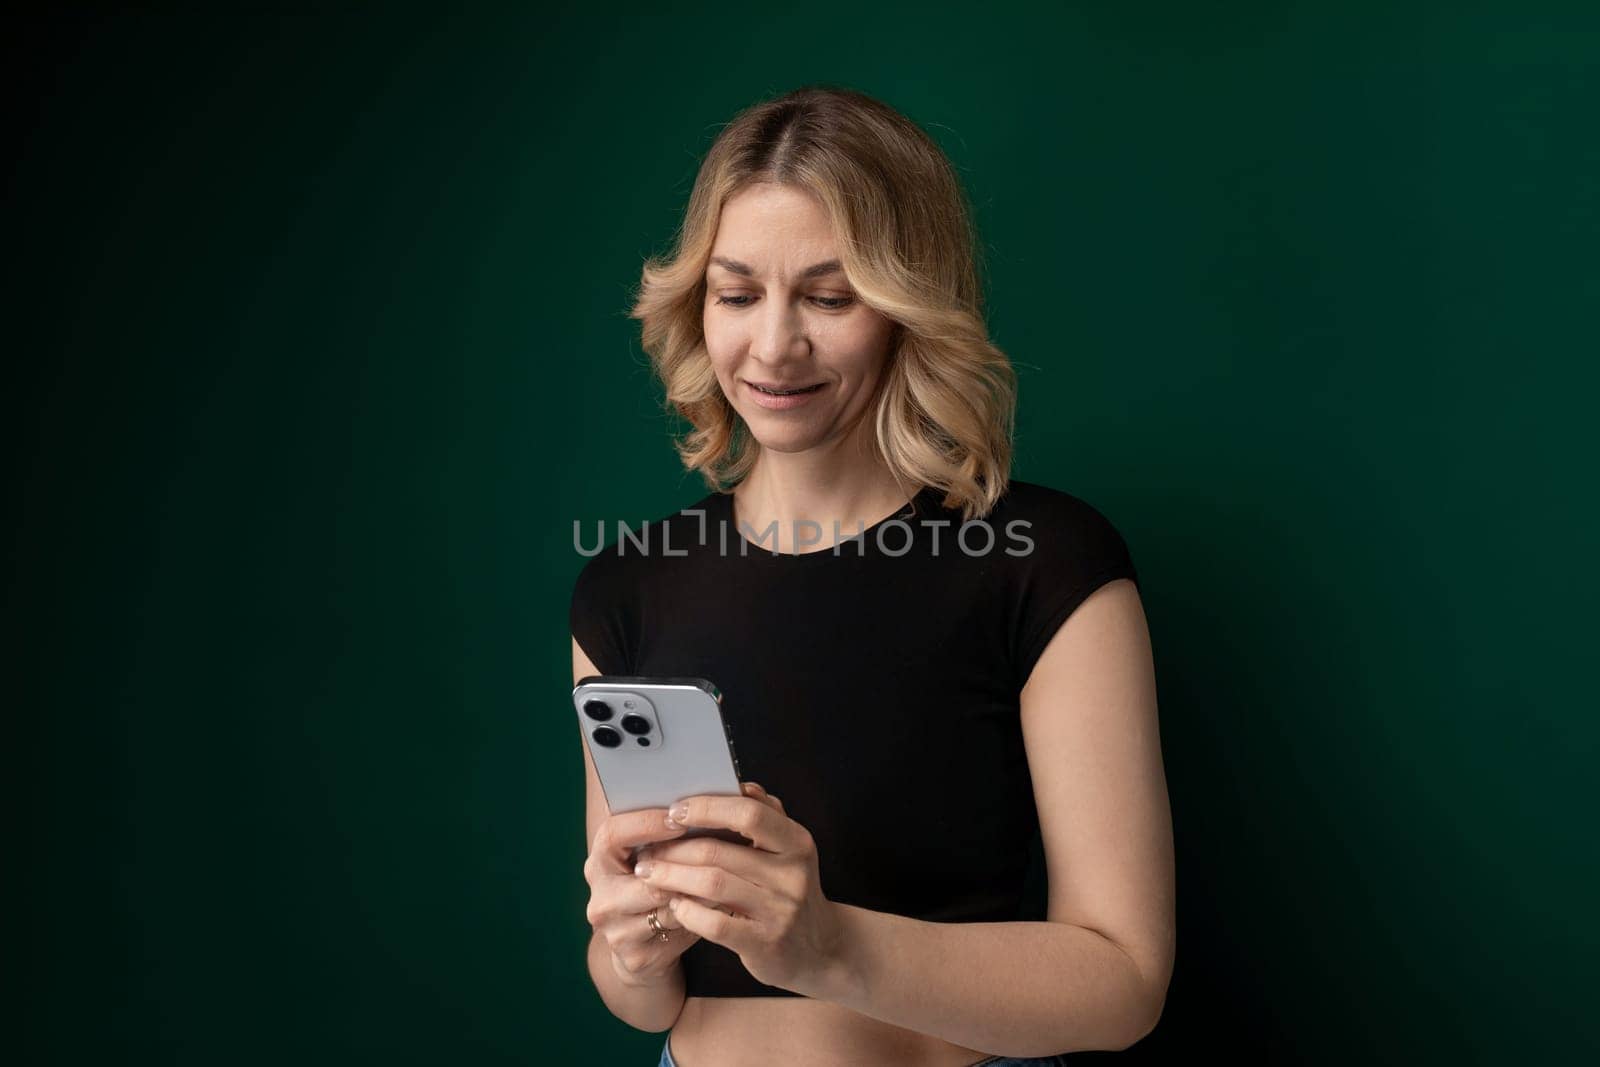 A woman wearing a black shirt is holding a cell phone in her hand.